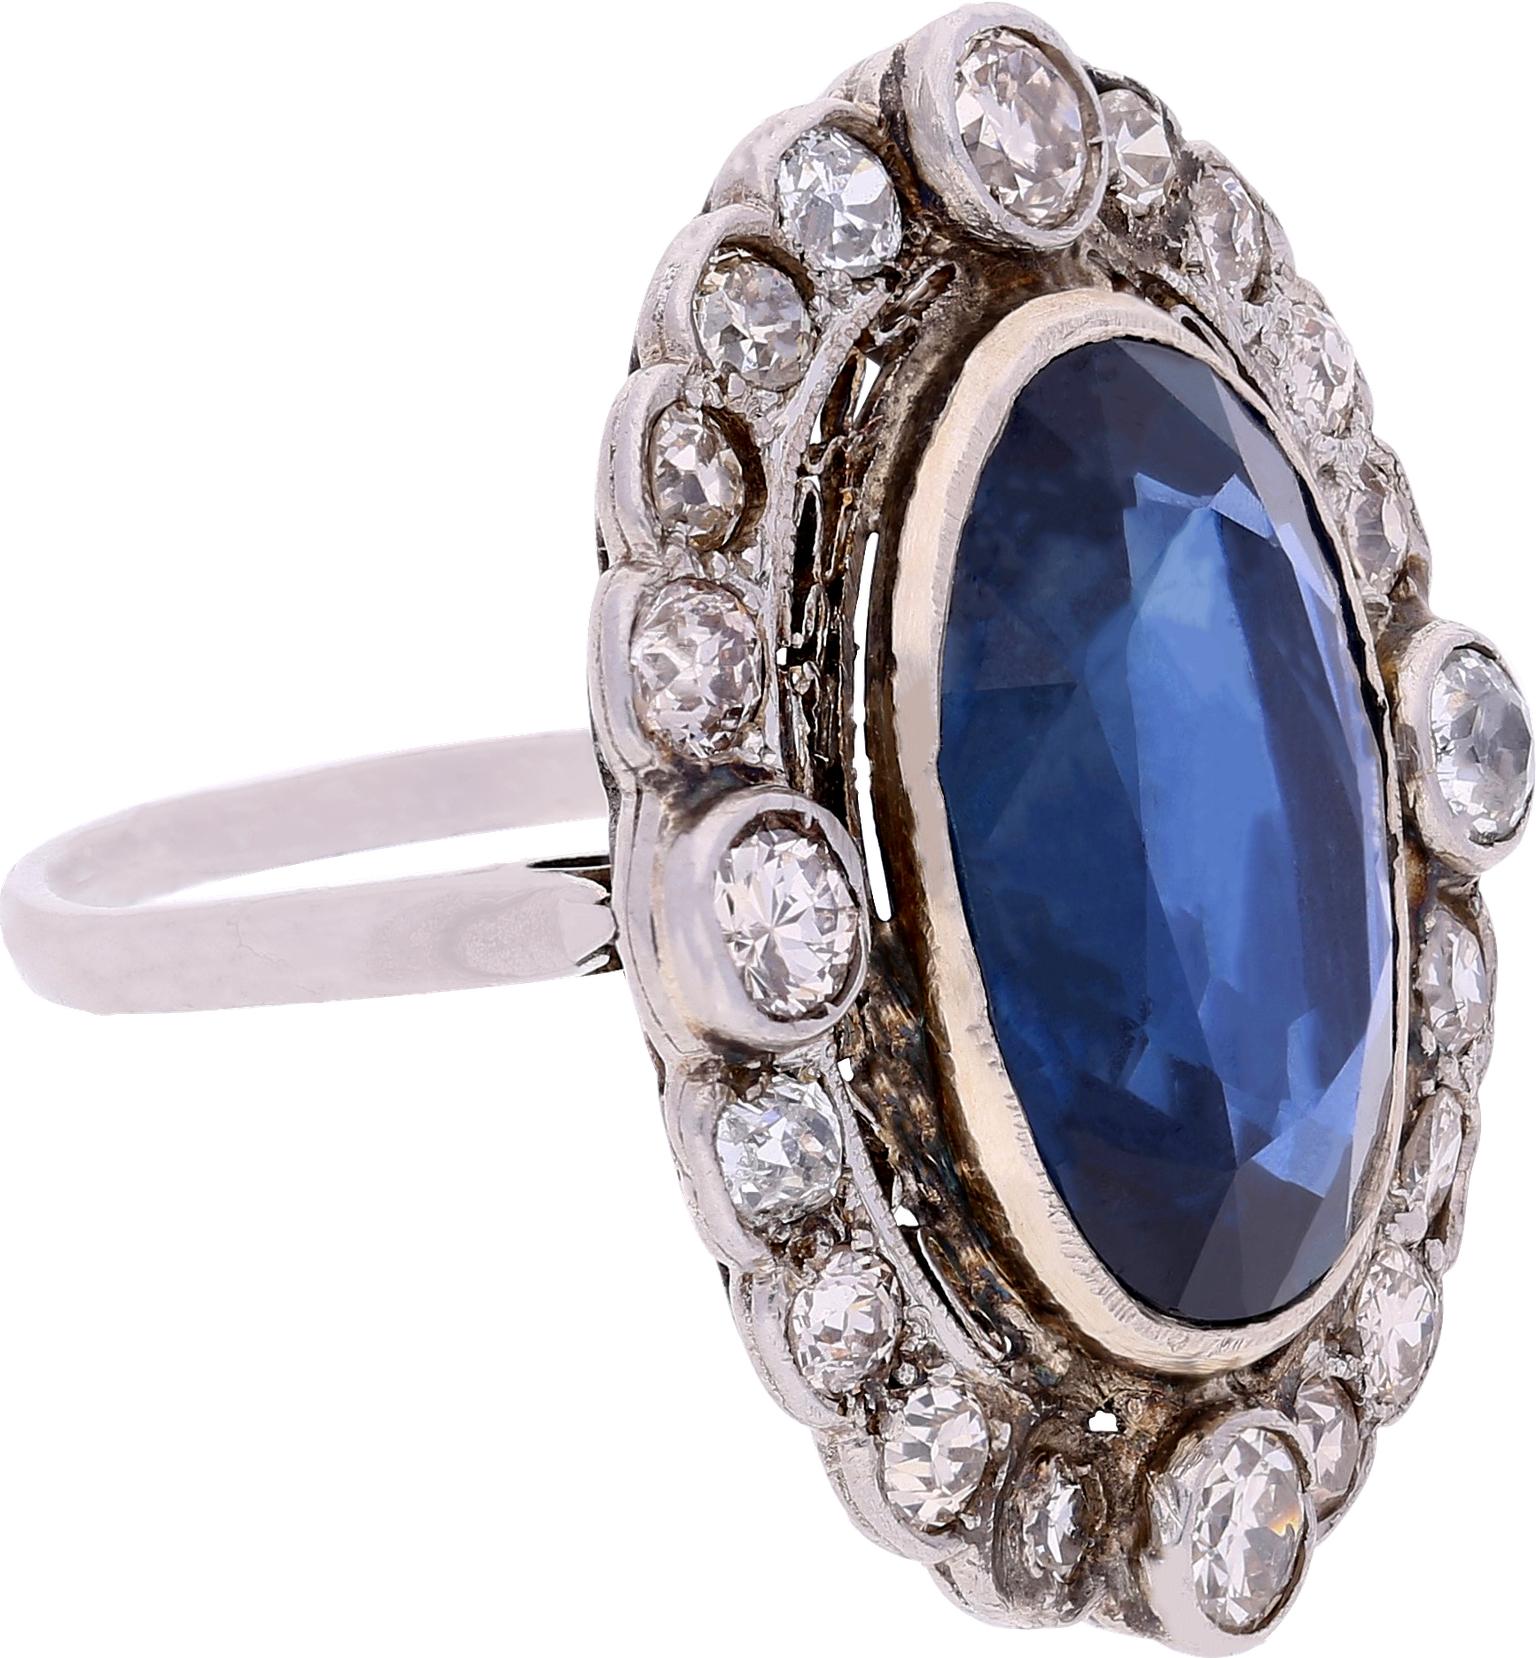 Centering a roughly 15 Carat Unheated Burma Sapphire (per AGL– American Gem Laboratory), framed by Old-European Cut Diamonds weighing 11.02 Carats, and set in Platinum and Silver, this Victorian Era Sapphire Ring is a time capsule to a bygone era of